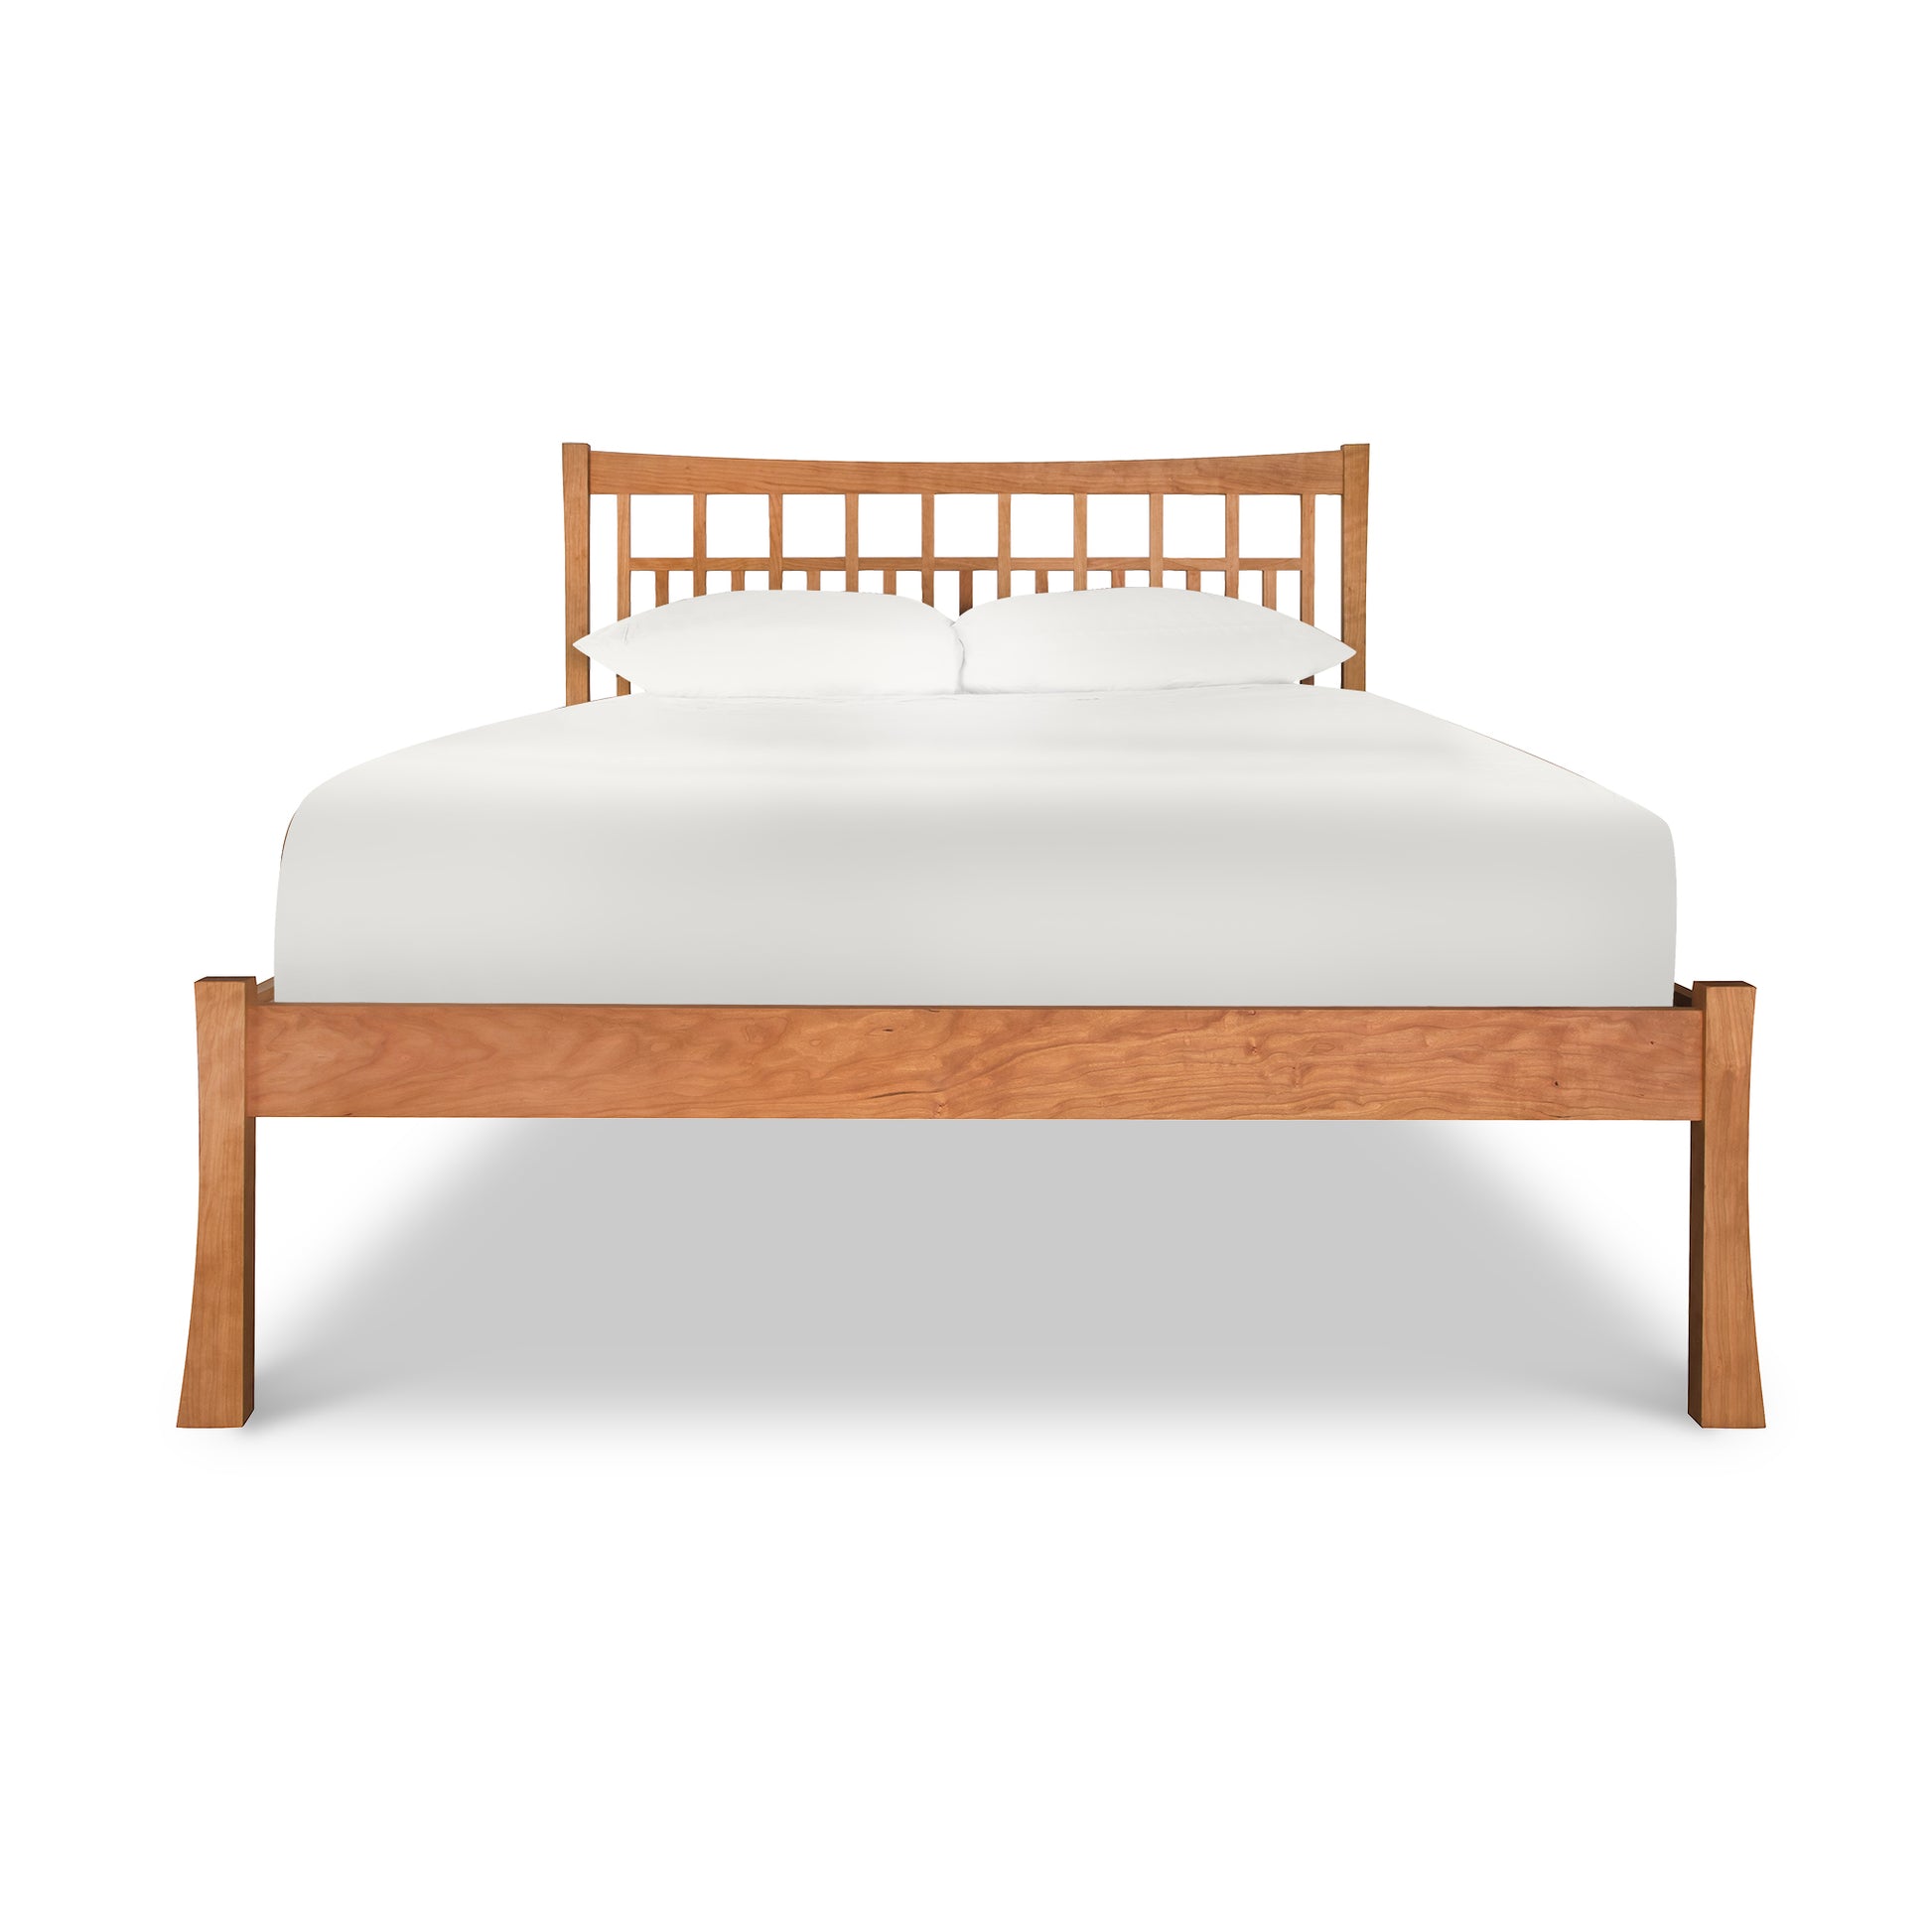 A Vermont Furniture Designs Contemporary Craftsman Low Footboard Bed, with a white mattress, isolated on a white background.